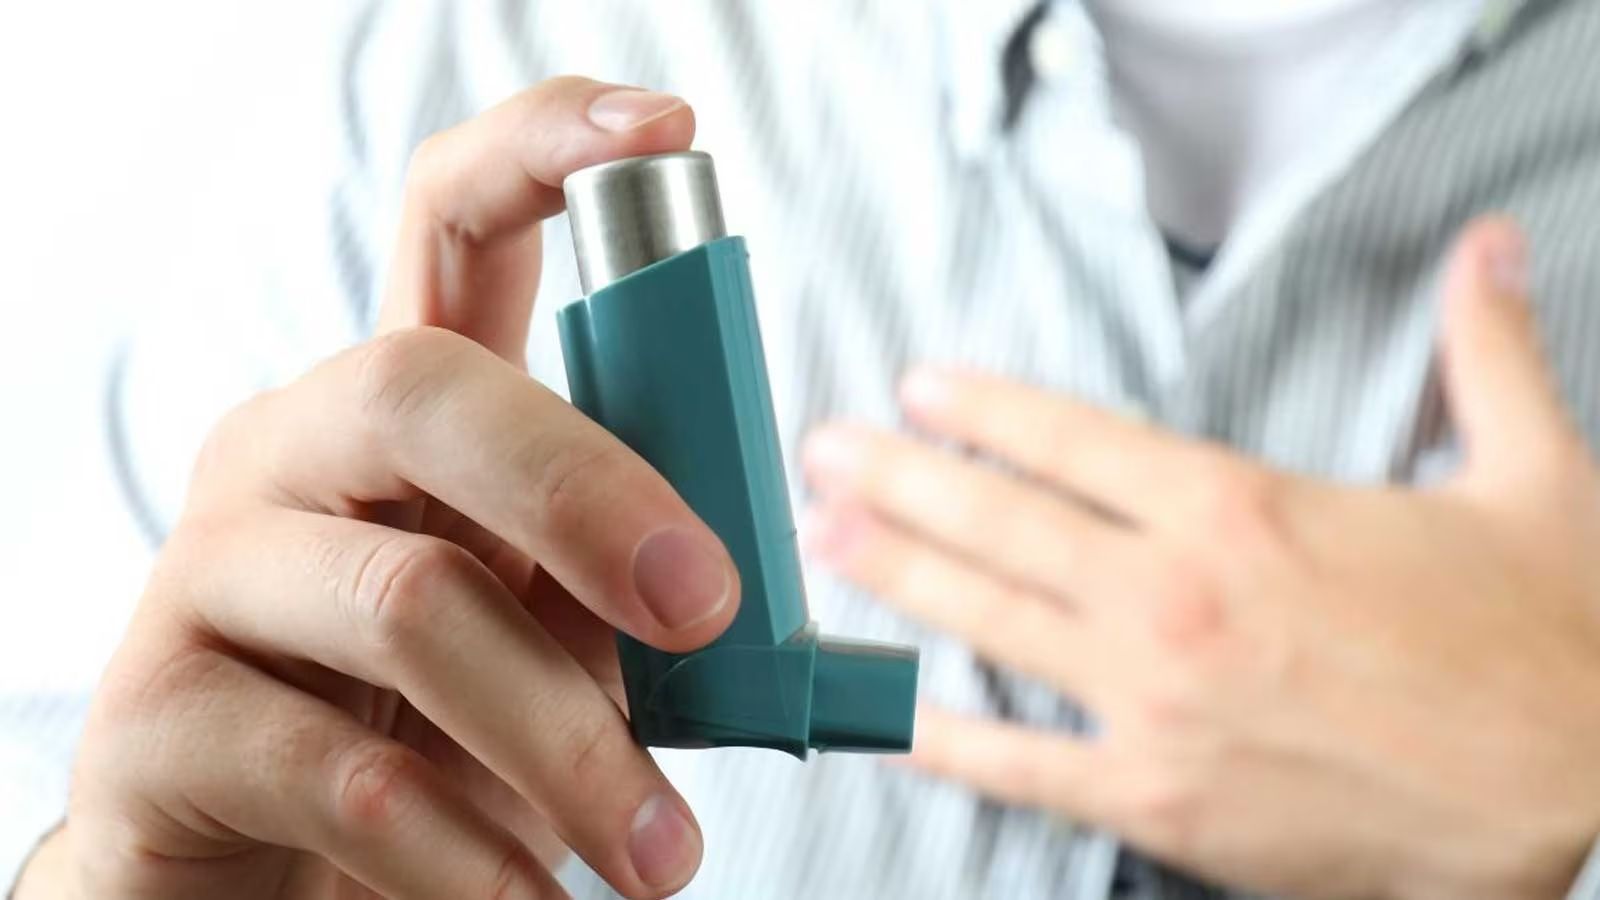 Getting To Know The Basics Of Asthma